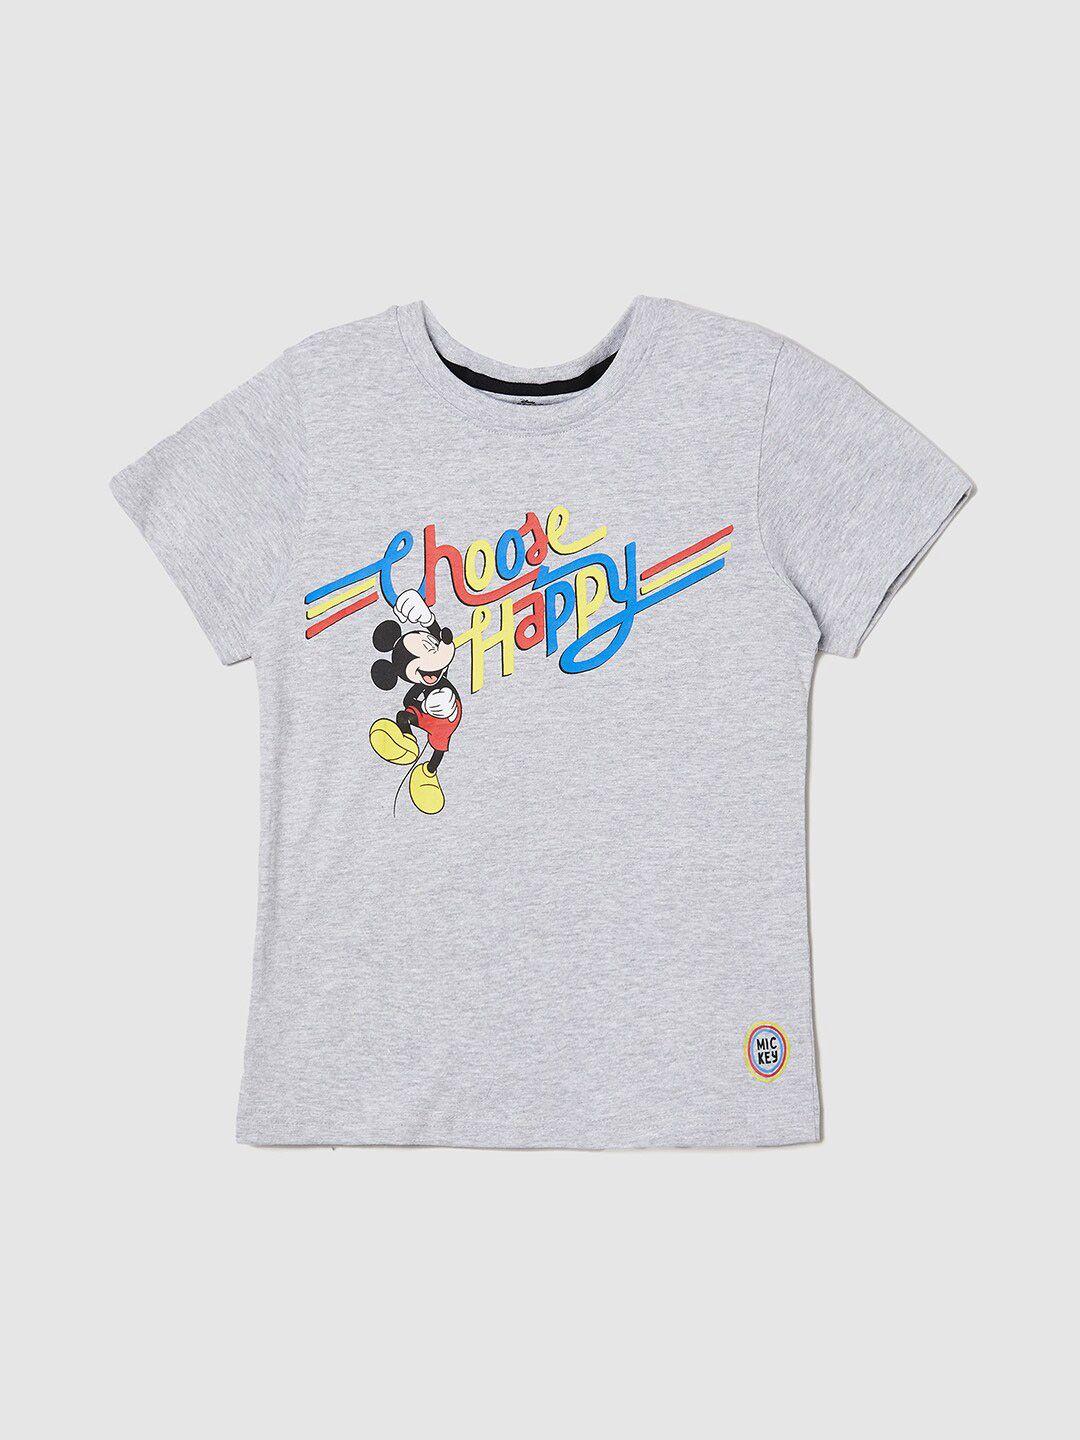 max Boys Mickey Mouse Printed Cotton T-shirt